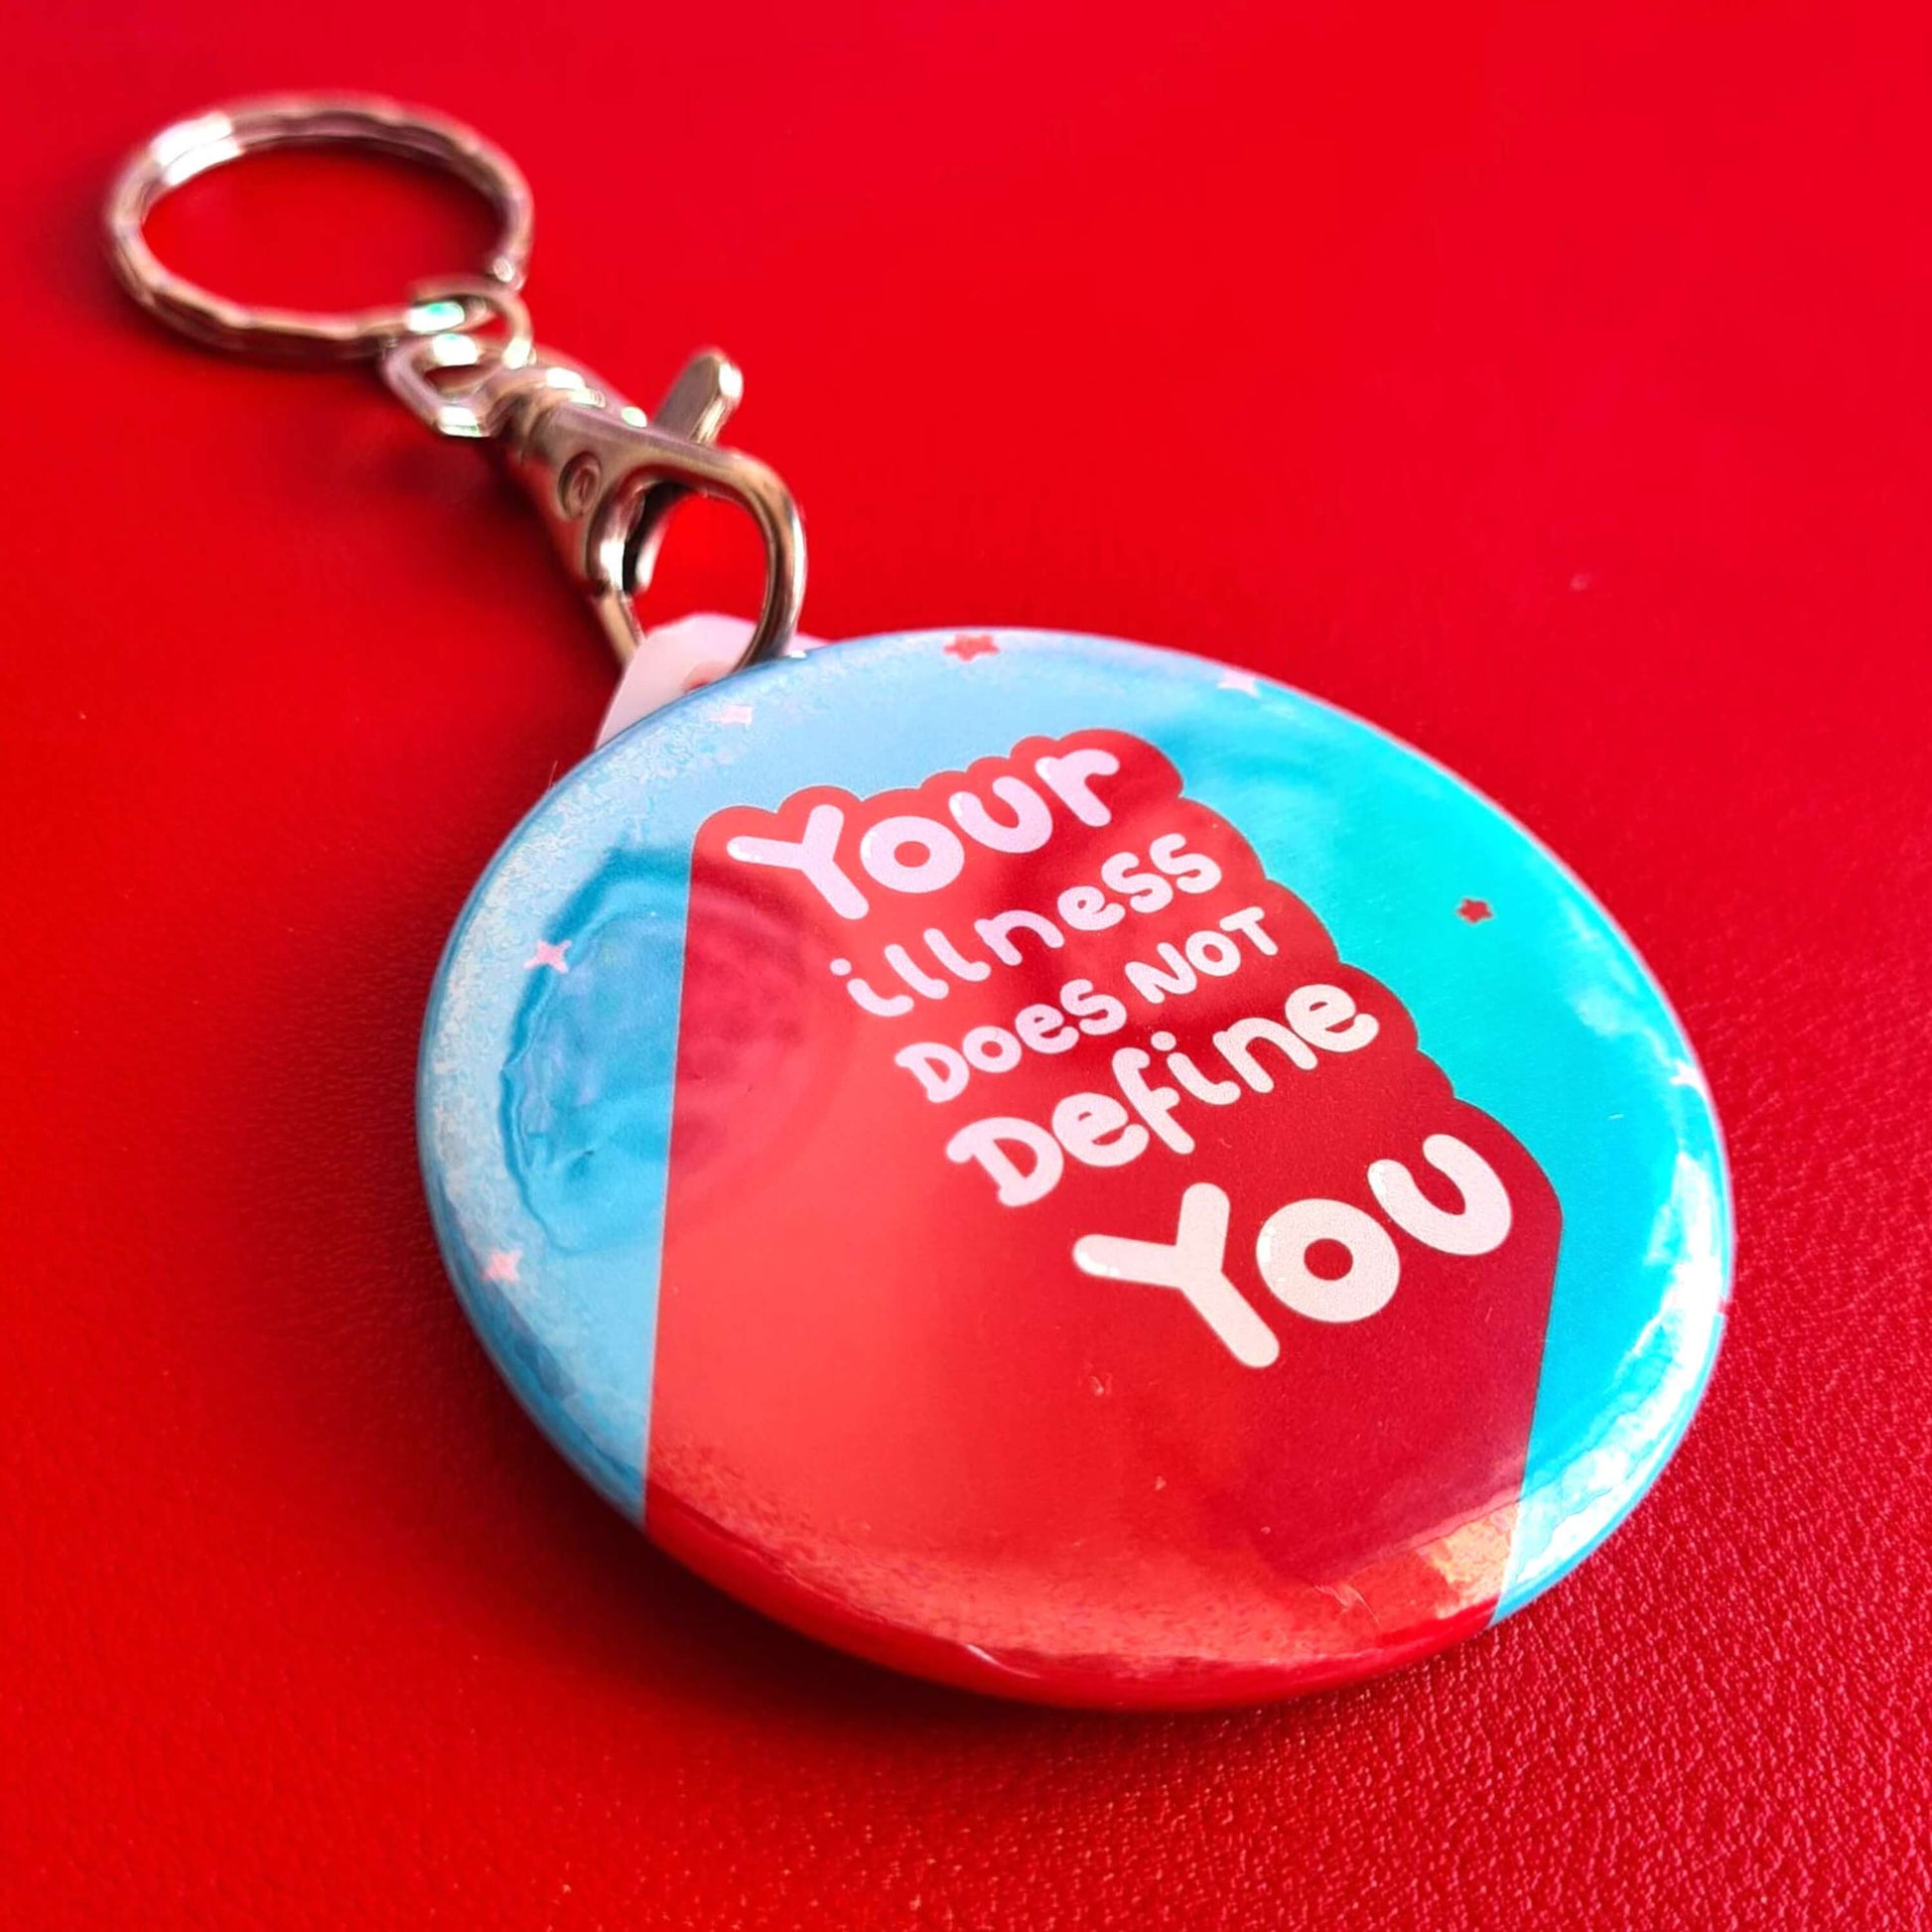 The Your Illness Does NOT Define You Keyring on a red background. The silver clip blue plastic circular keyring has red and white sparkles and text reading 'your illness does not define you'. A hand drawn design raising awareness for invisible illnesses.